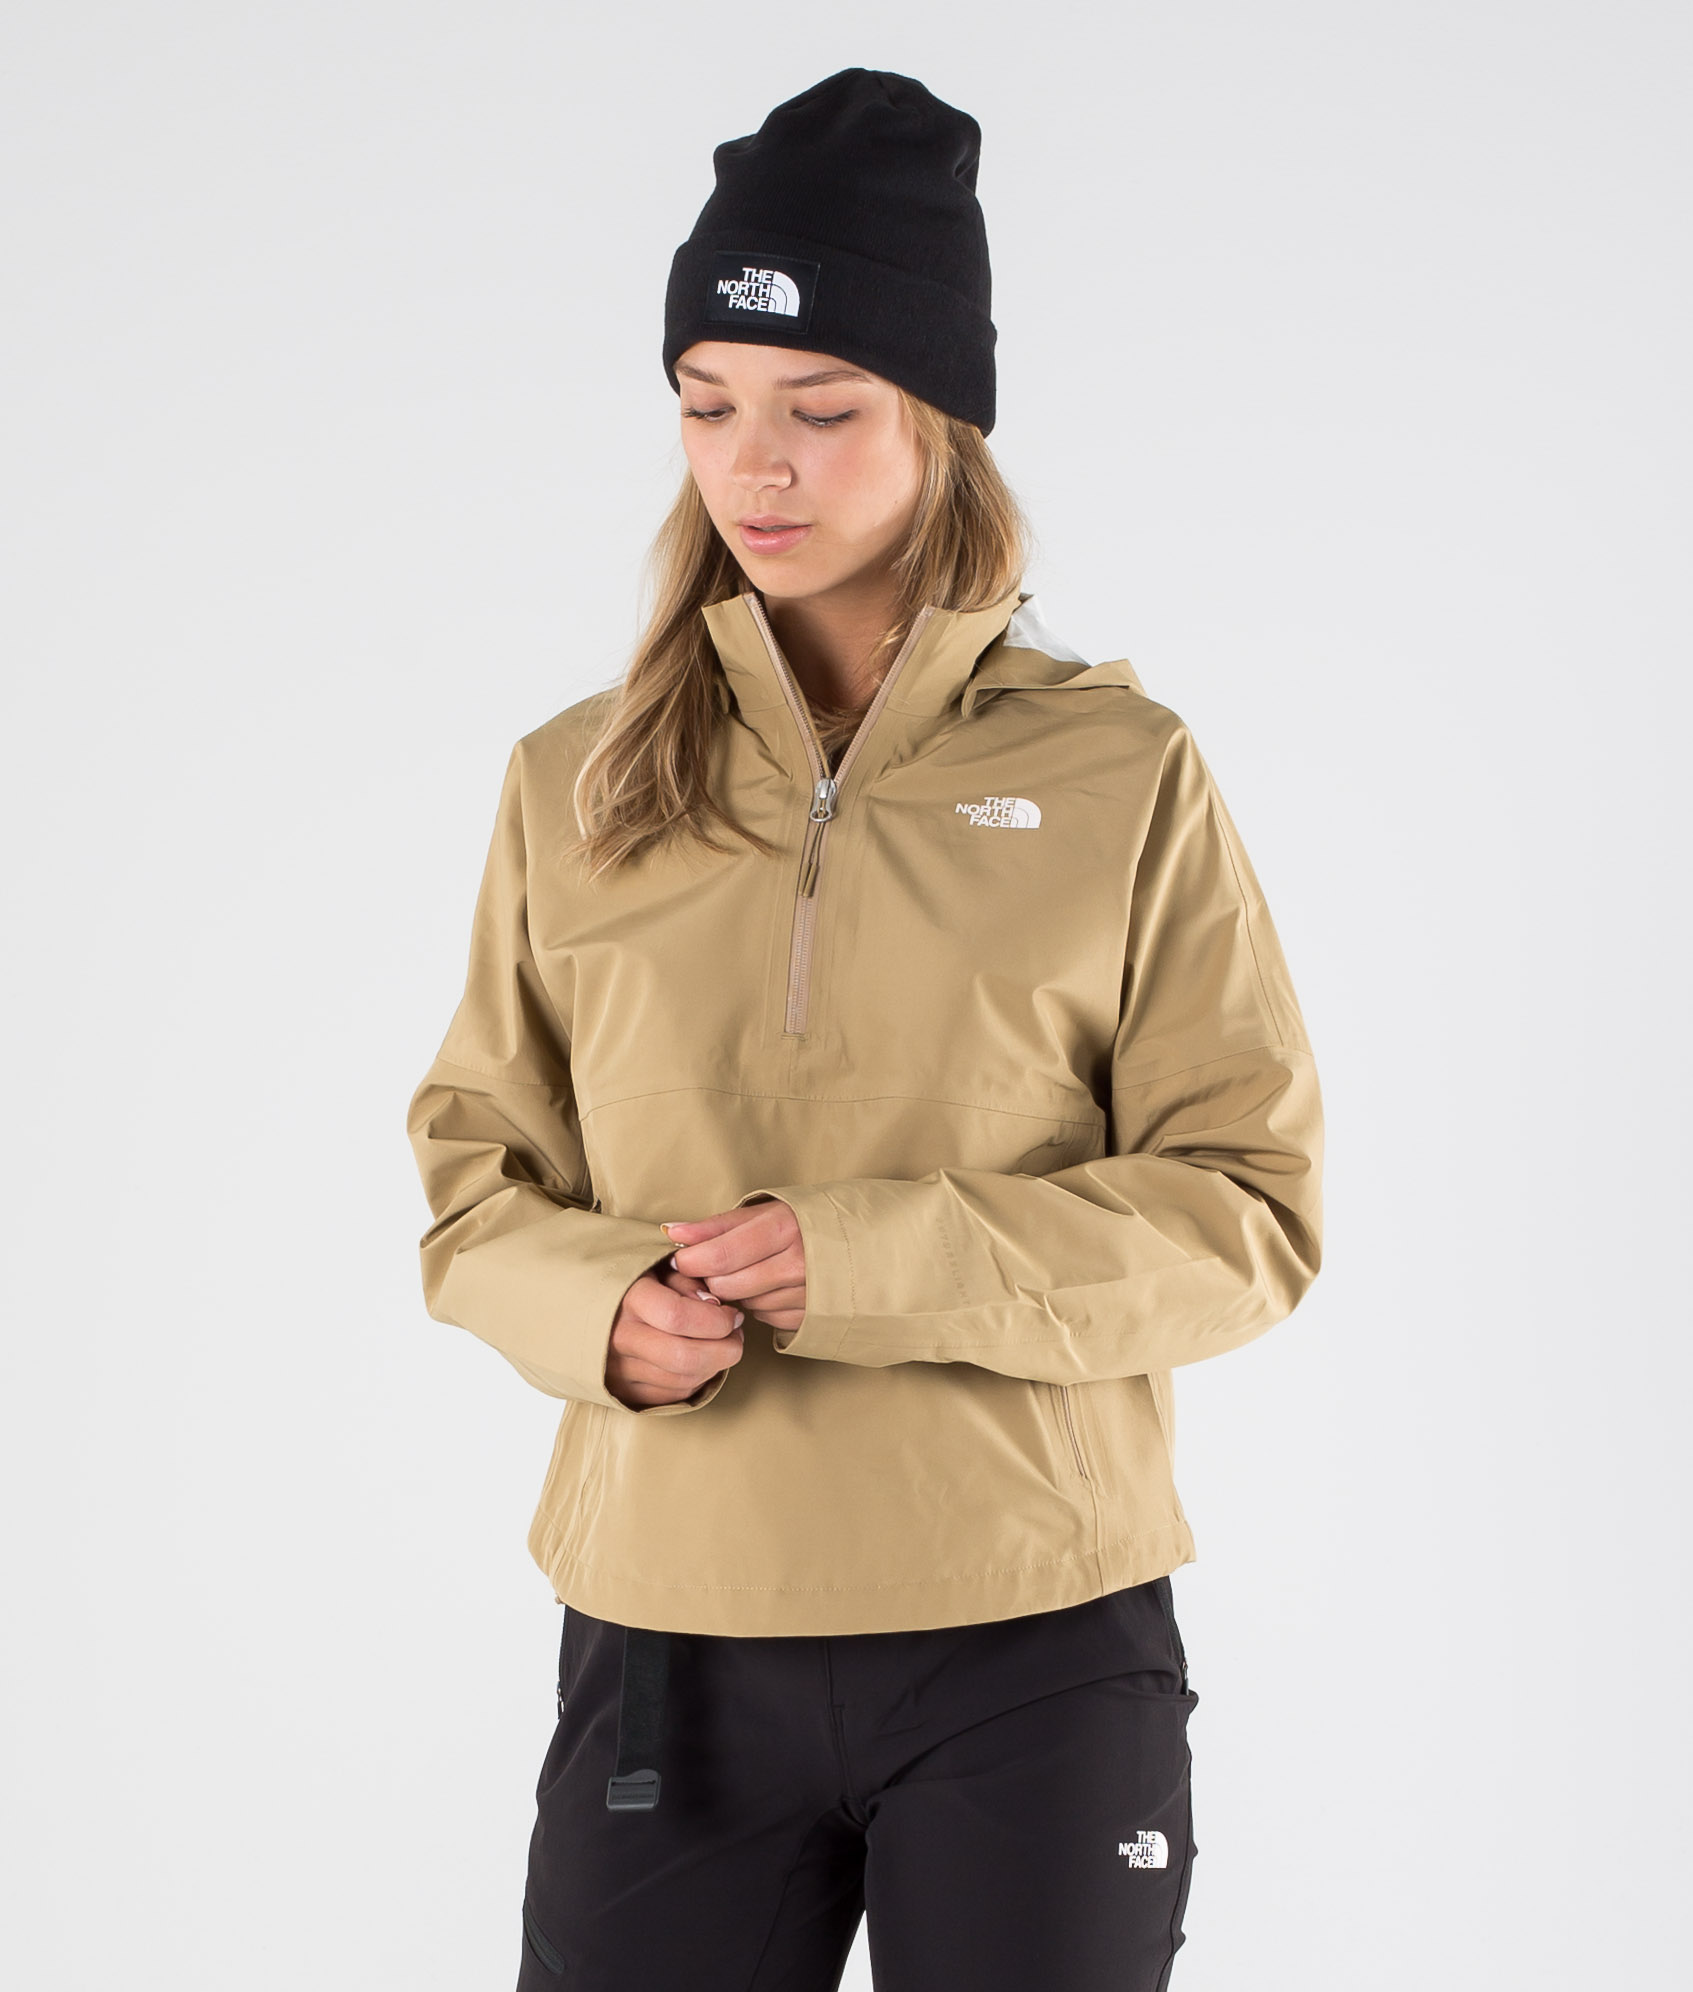 the north face beige jacket